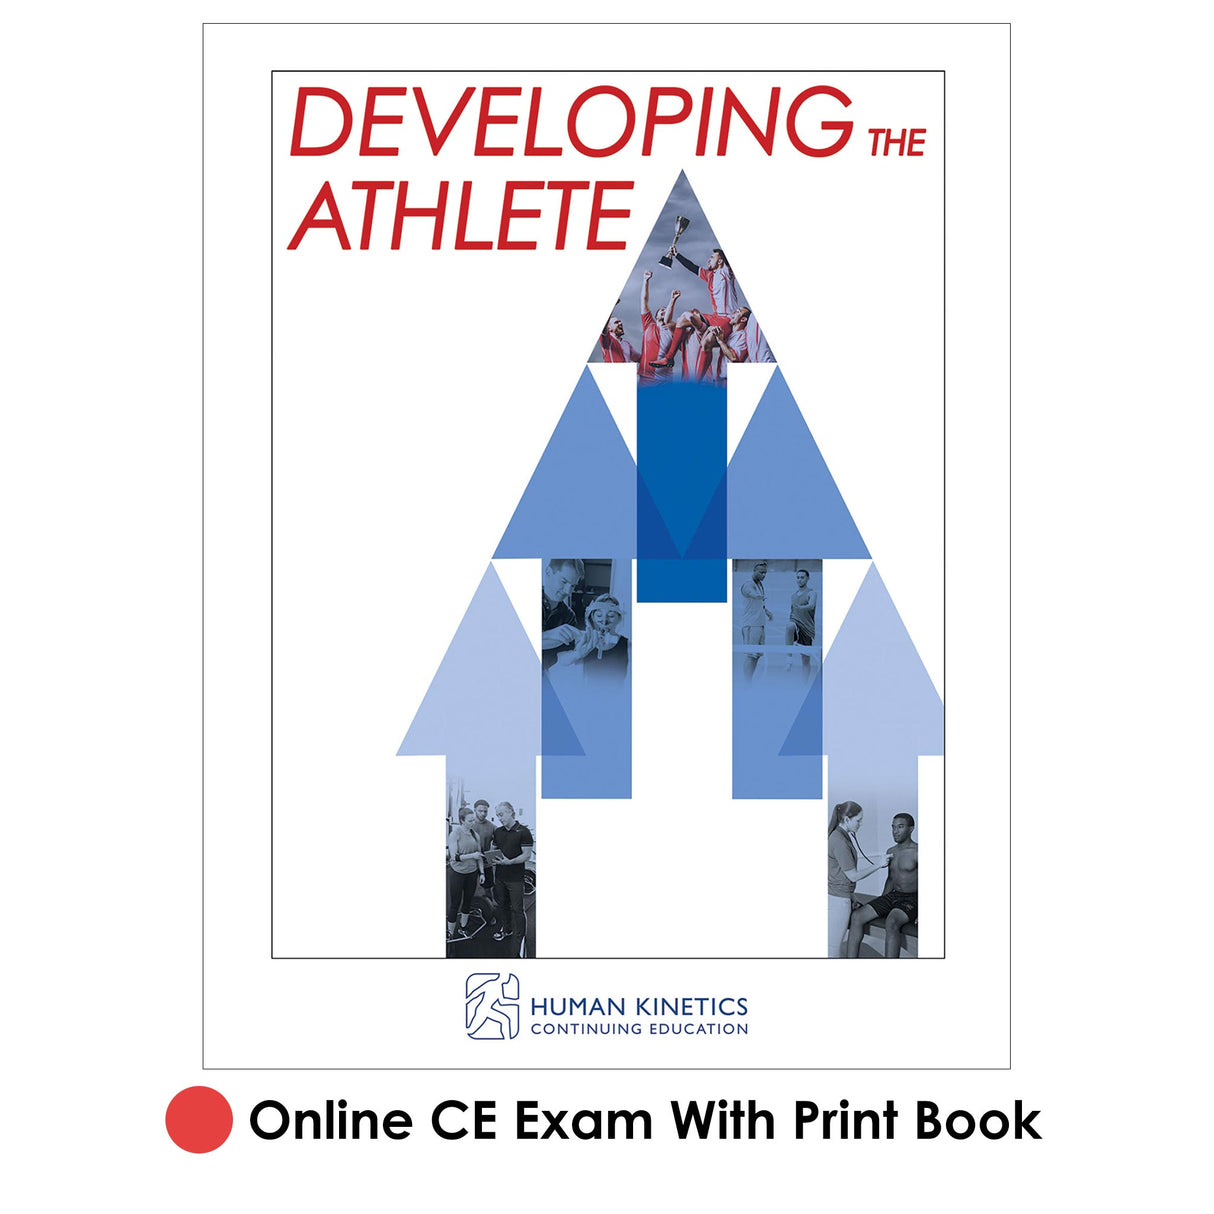 Developing the Athlete Online CE Exam With Print Book